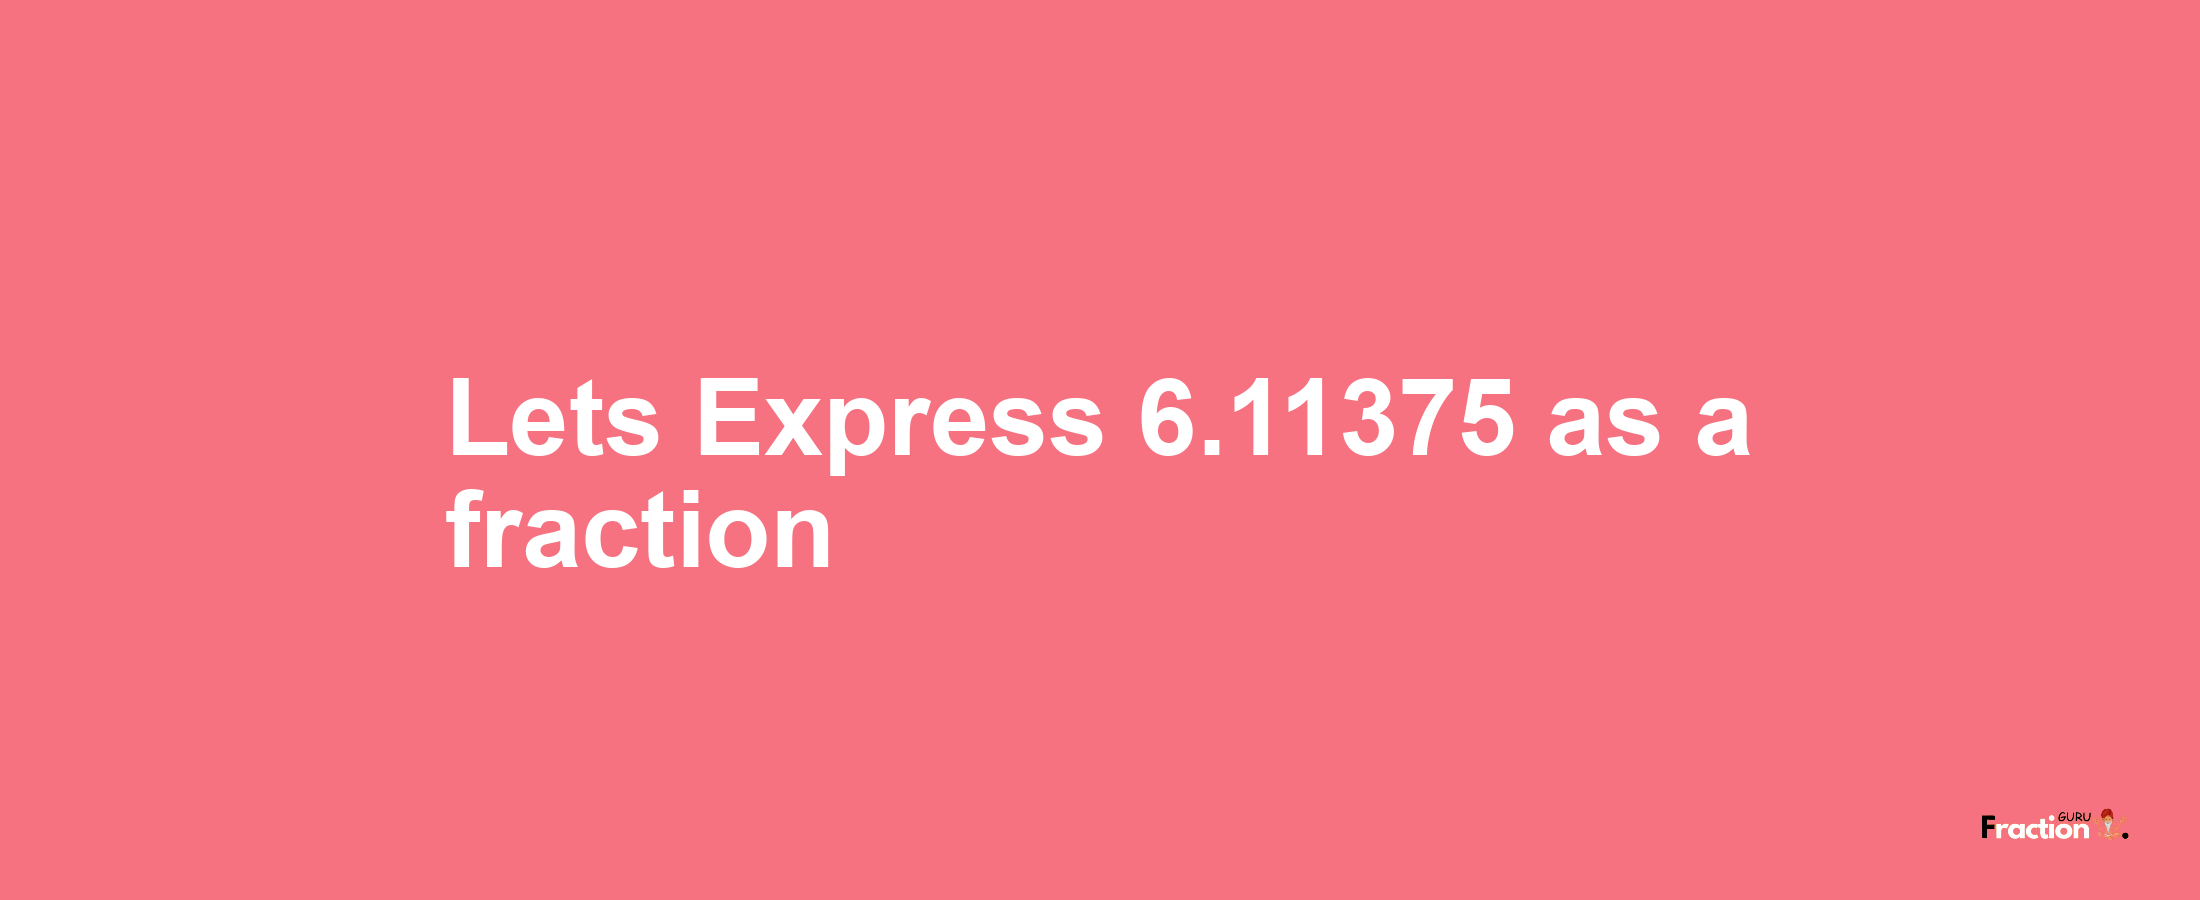 Lets Express 6.11375 as afraction